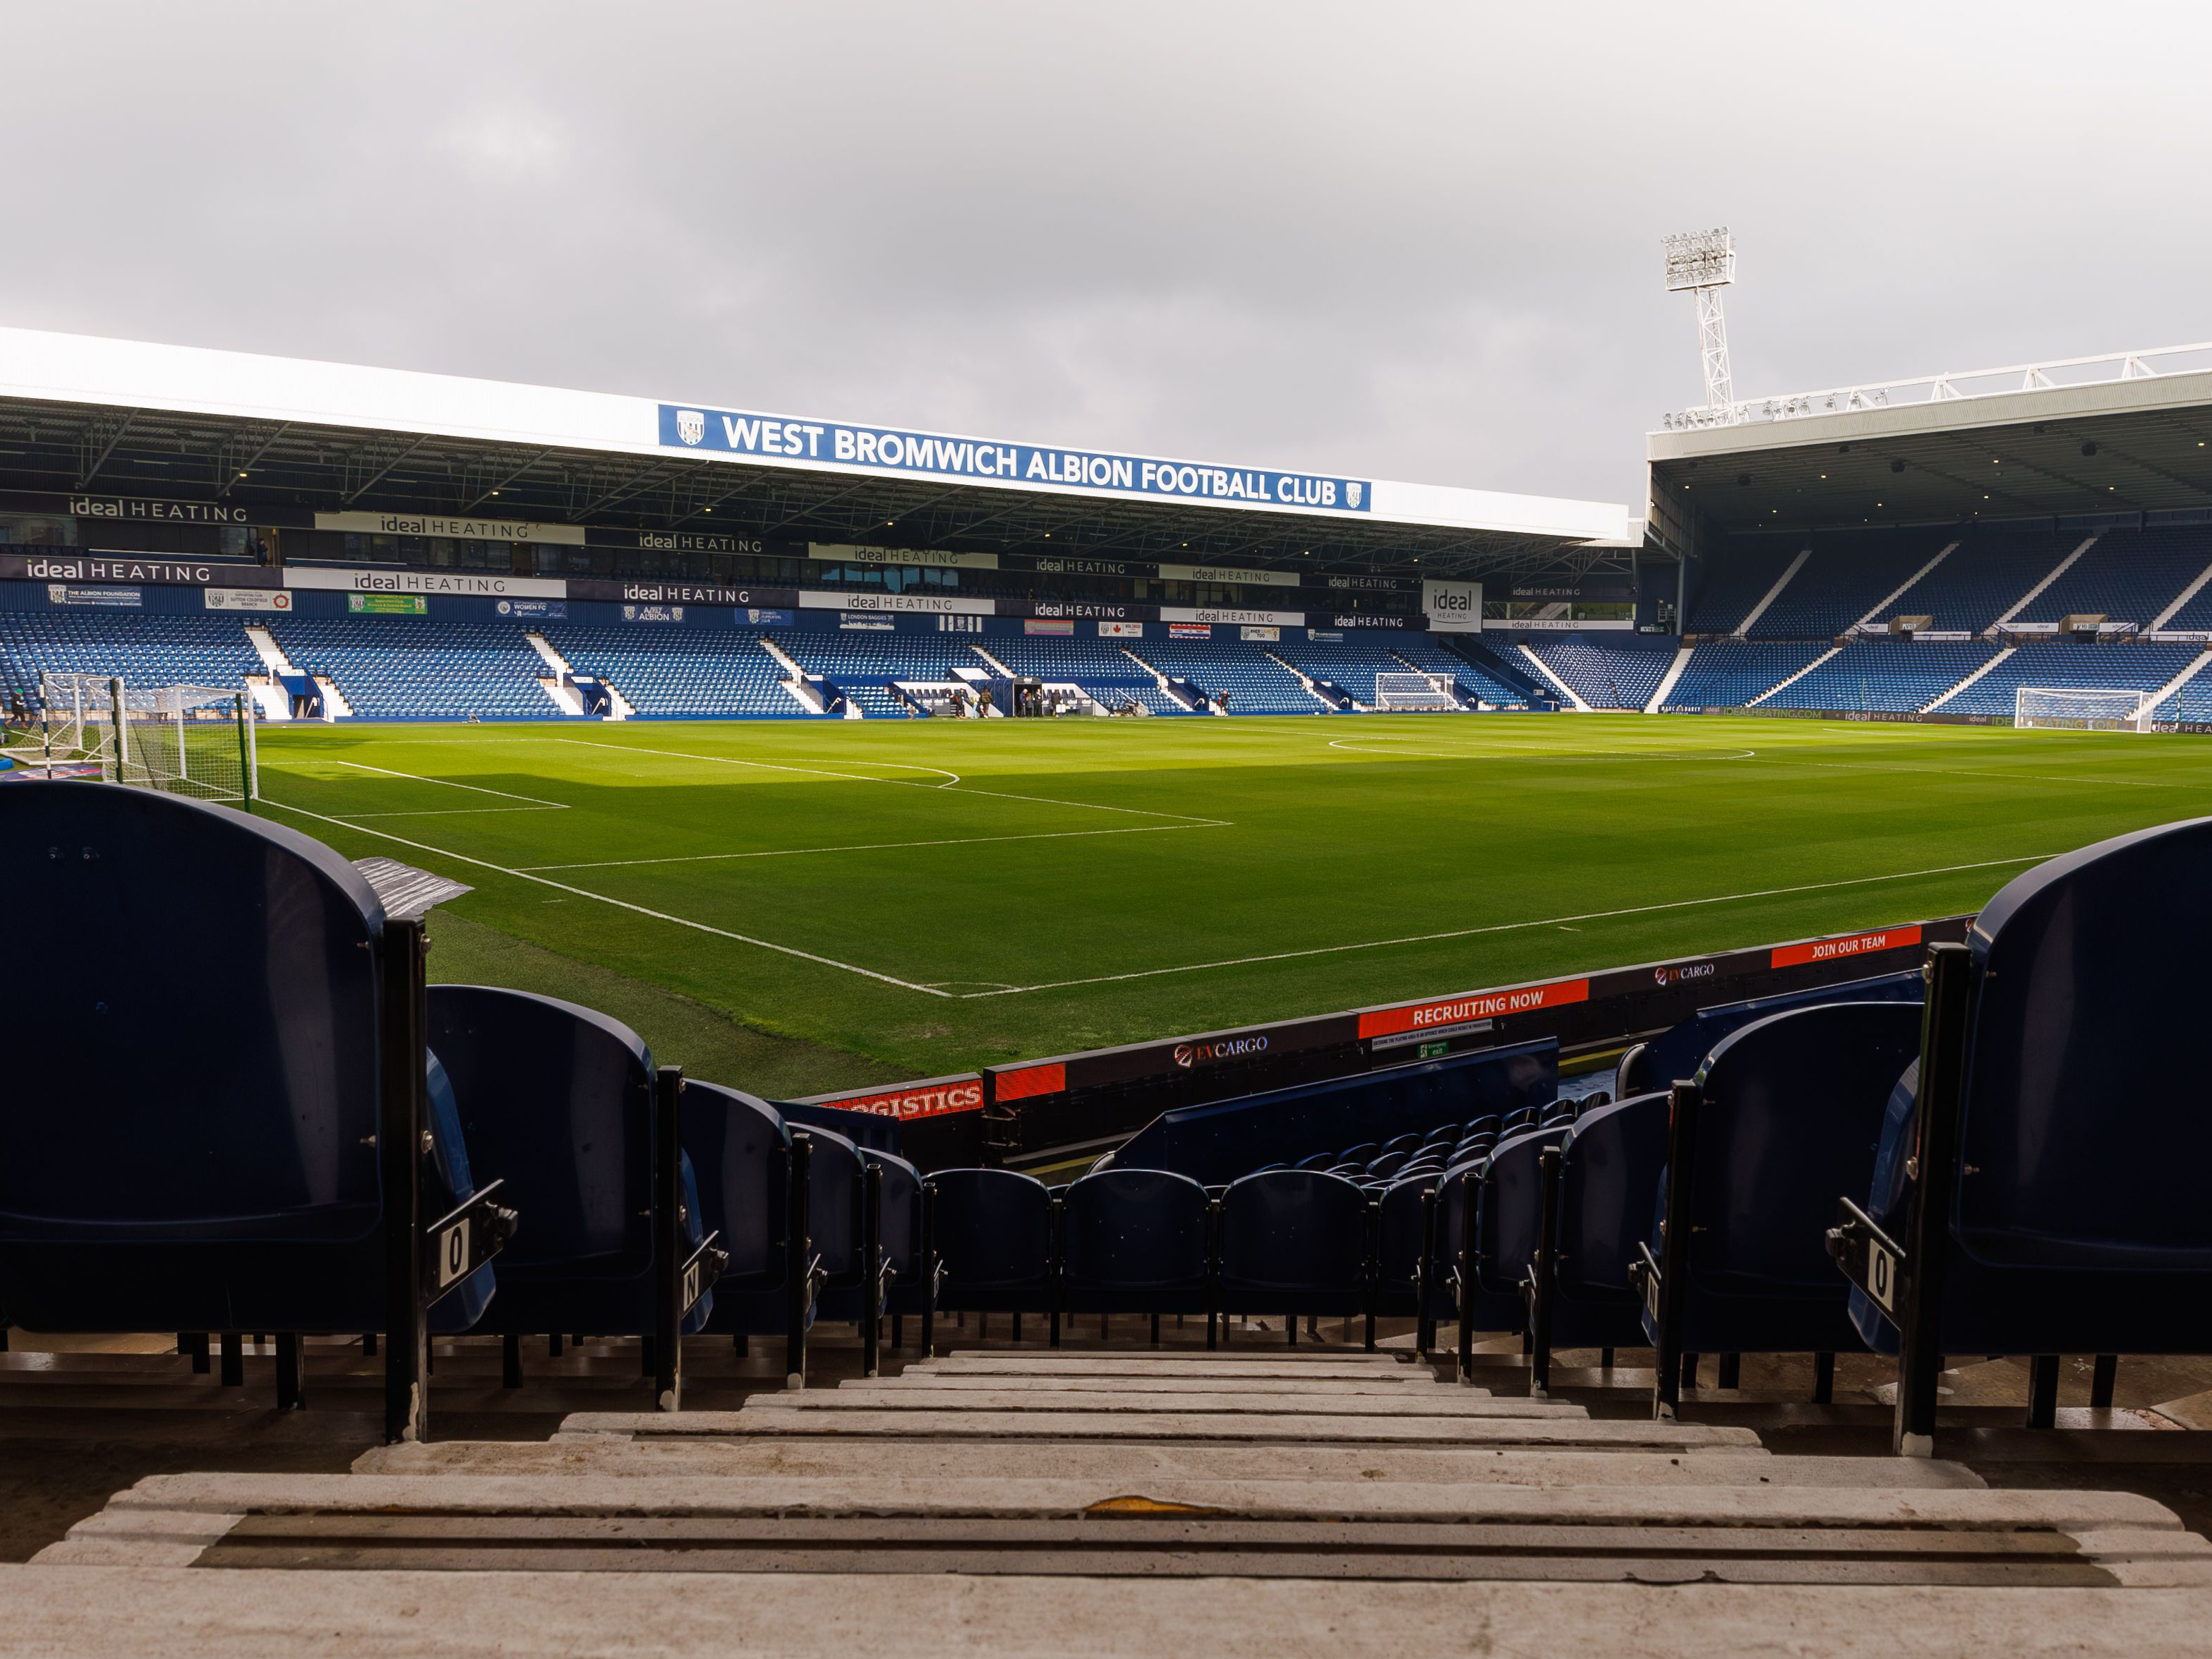 The Halfords Lane stand at The Hawthorns